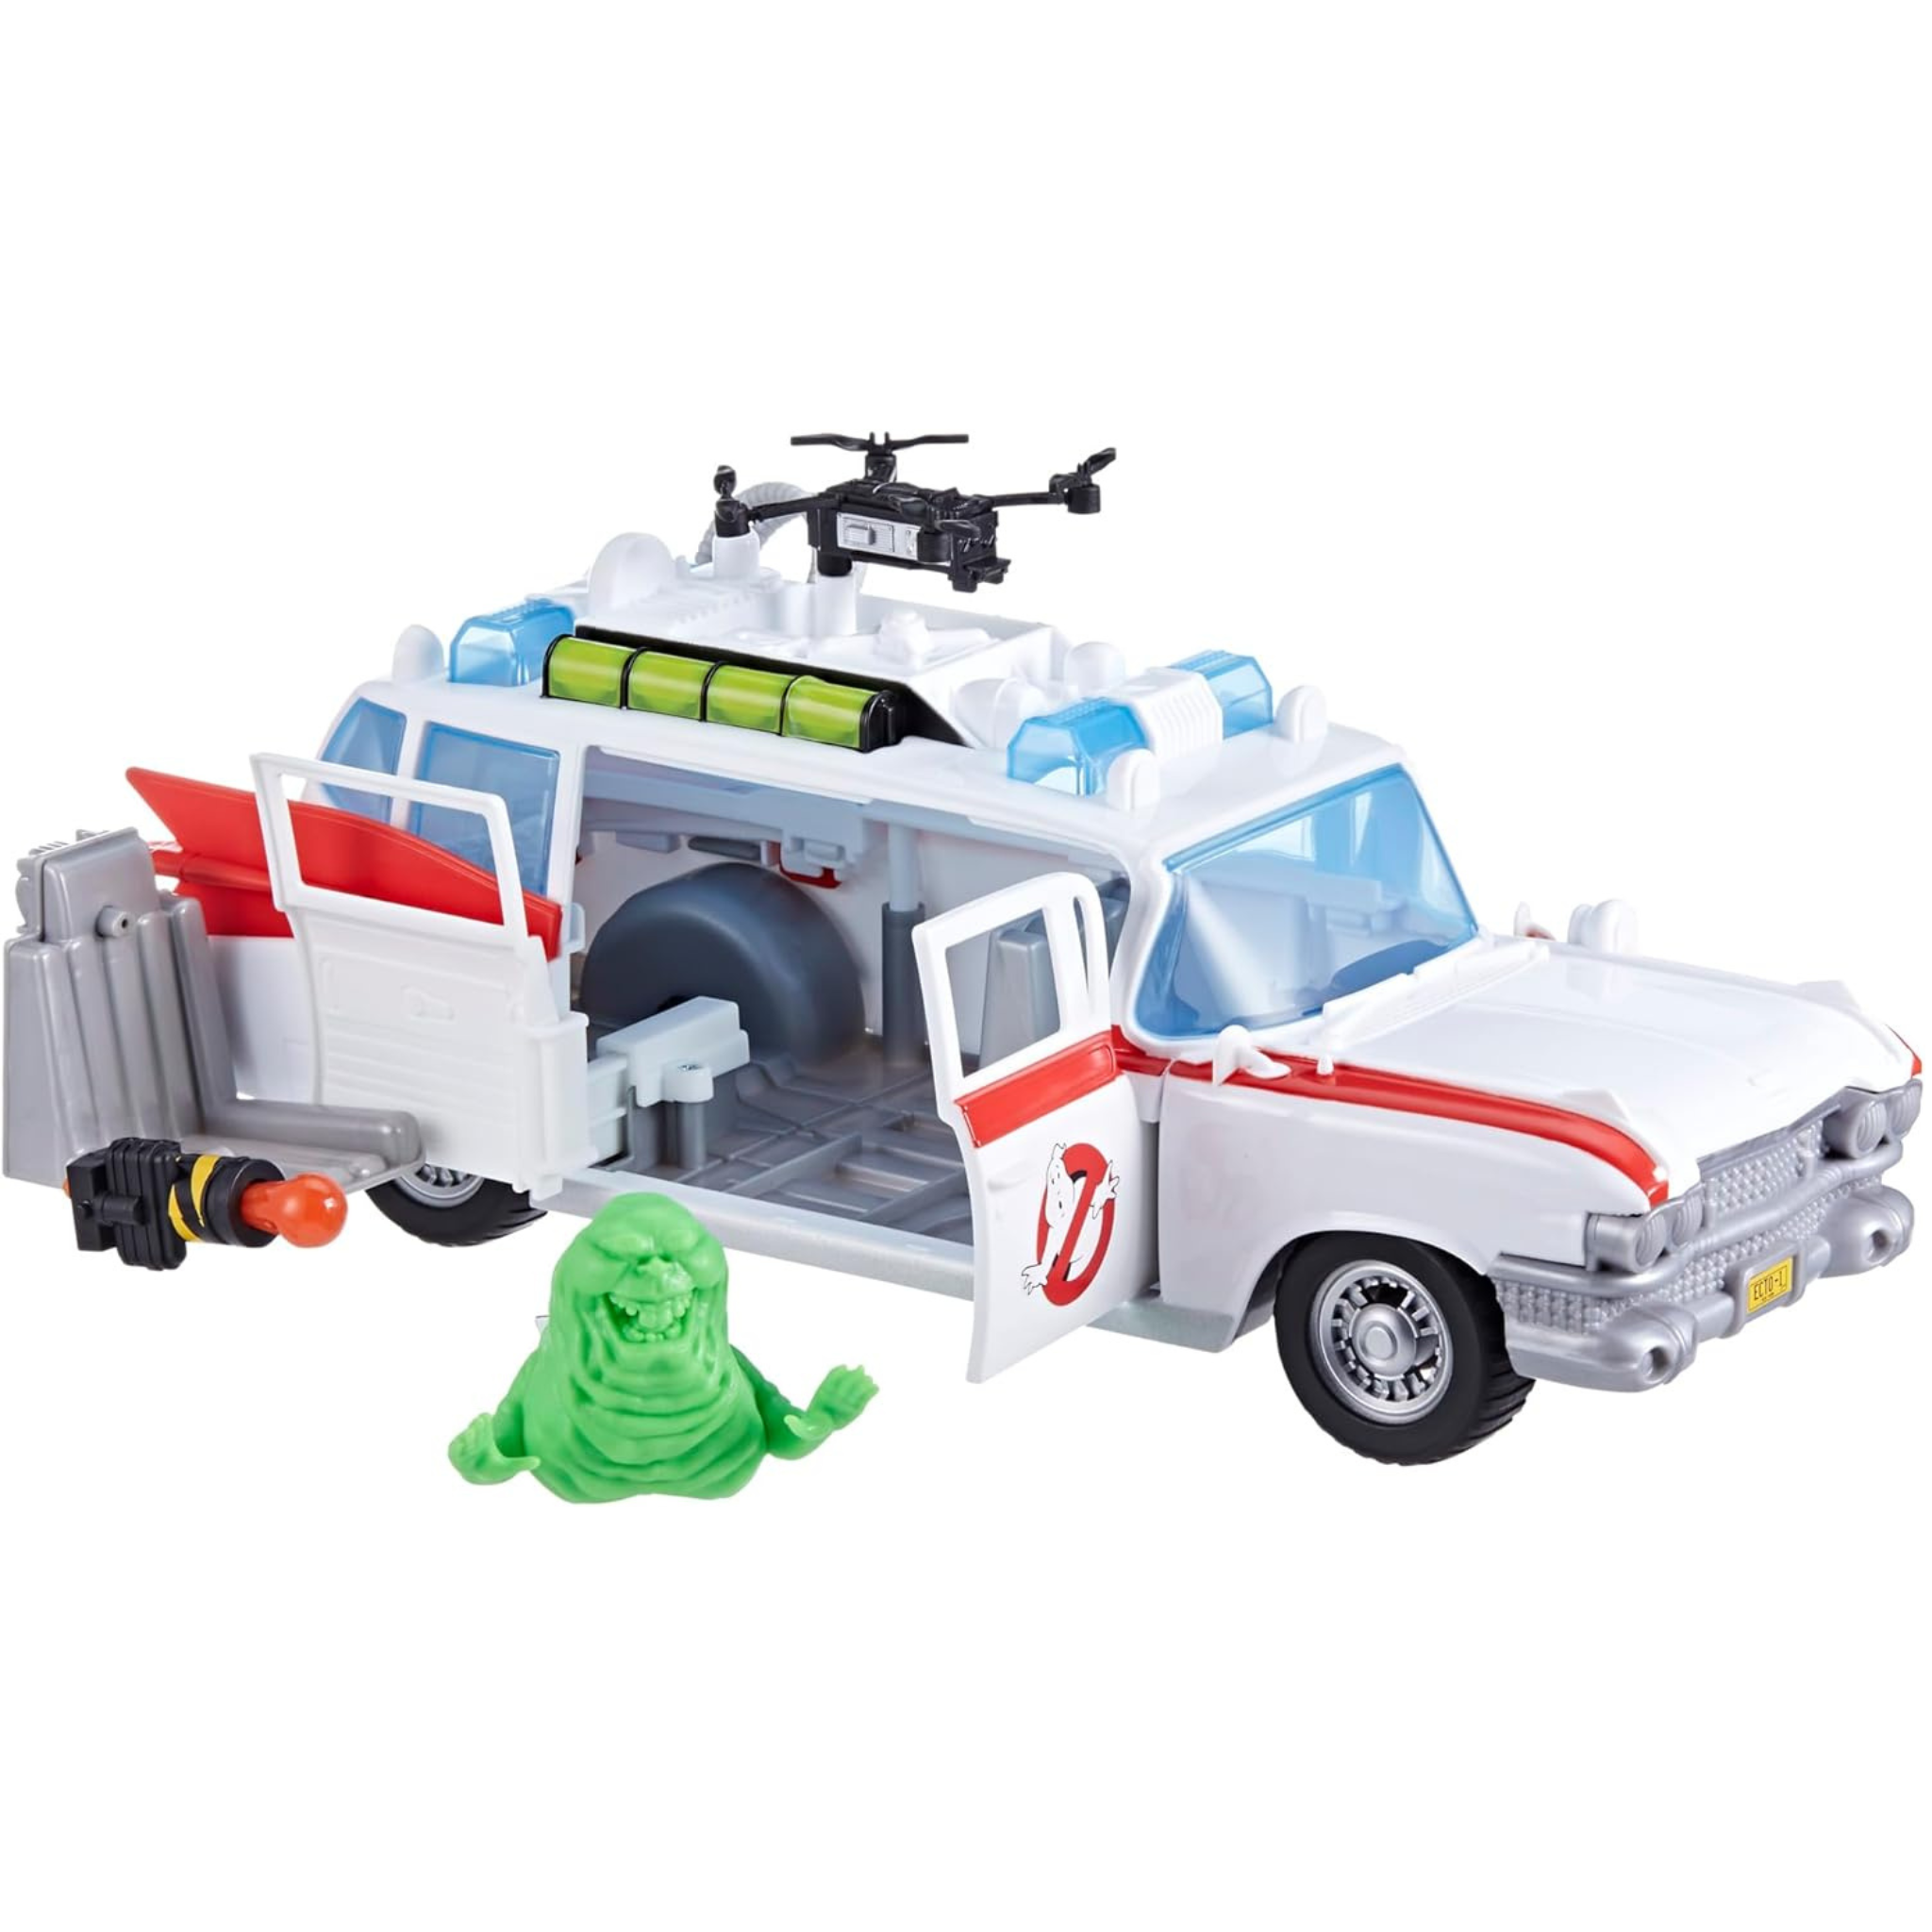 Ghostbusters Track and Trap Ecto-1 Toy Vehicle with Slimer Figure